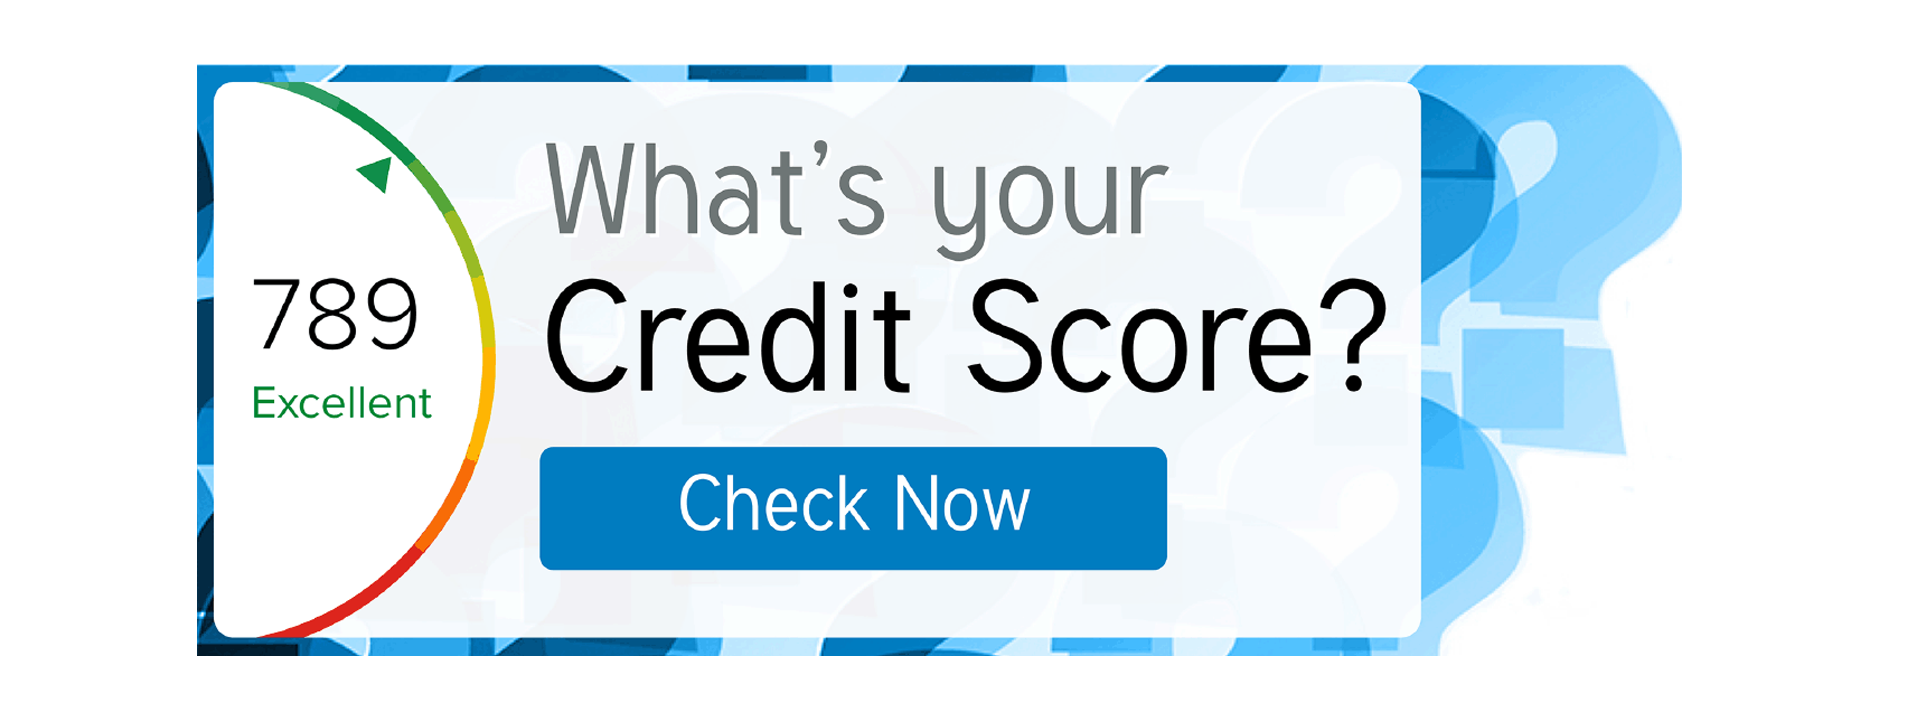 Check your credit score now